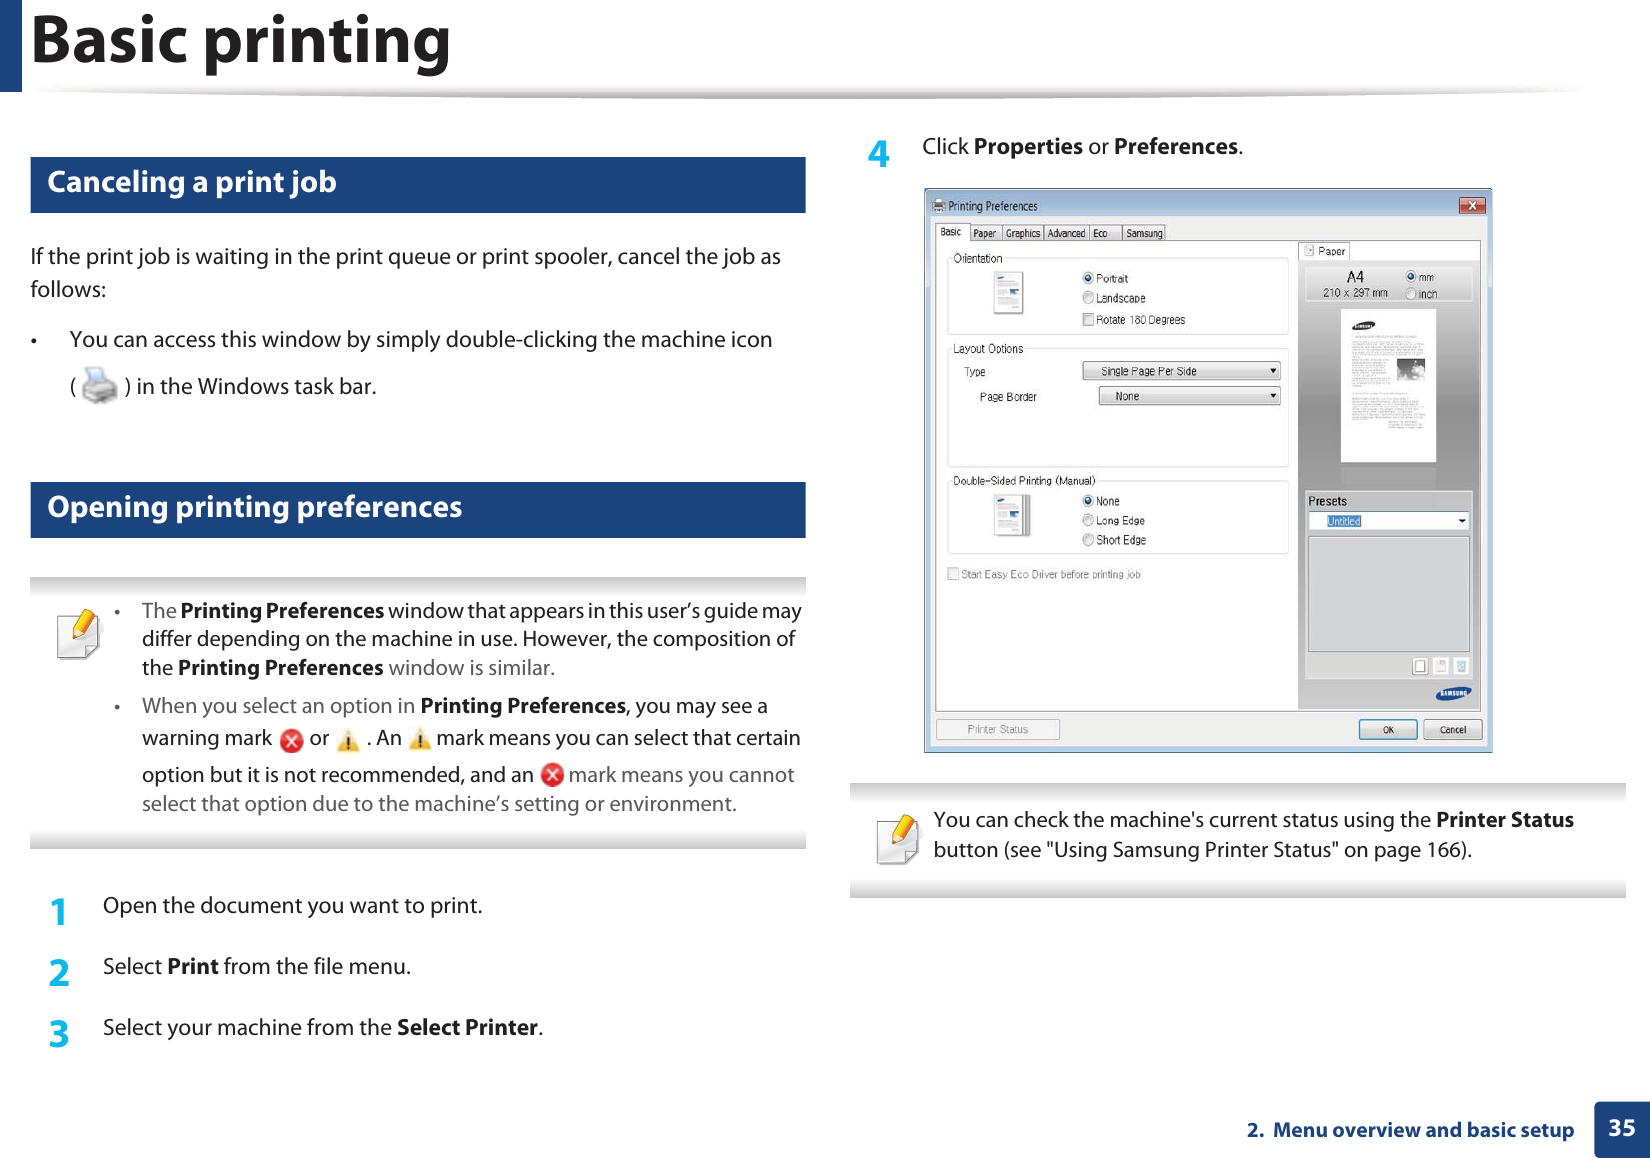 Basic printing352.  Menu overview and basic setup7 Canceling a print jobIf the print job is waiting in the print queue or print spooler, cancel the job as follows:• You can access this window by simply double-clicking the machine icon ( ) in the Windows task bar. 8 Opening printing preferences • The Printing Preferences window that appears in this user’s guide may differ depending on the machine in use. However, the composition of the Printing Preferences window is similar.• When you select an option in Printing Preferences, you may see a warning mark   or   . An   mark means you can select that certain option but it is not recommended, and an   mark means you cannot select that option due to the machine’s setting or environment. 1Open the document you want to print.2  Select Print from the file menu.3  Select your machine from the Select Printer. 4  Click Properties or Preferences.  You can check the machine&apos;s current status using the Printer Status button (see &quot;Using Samsung Printer Status&quot; on page 166). 